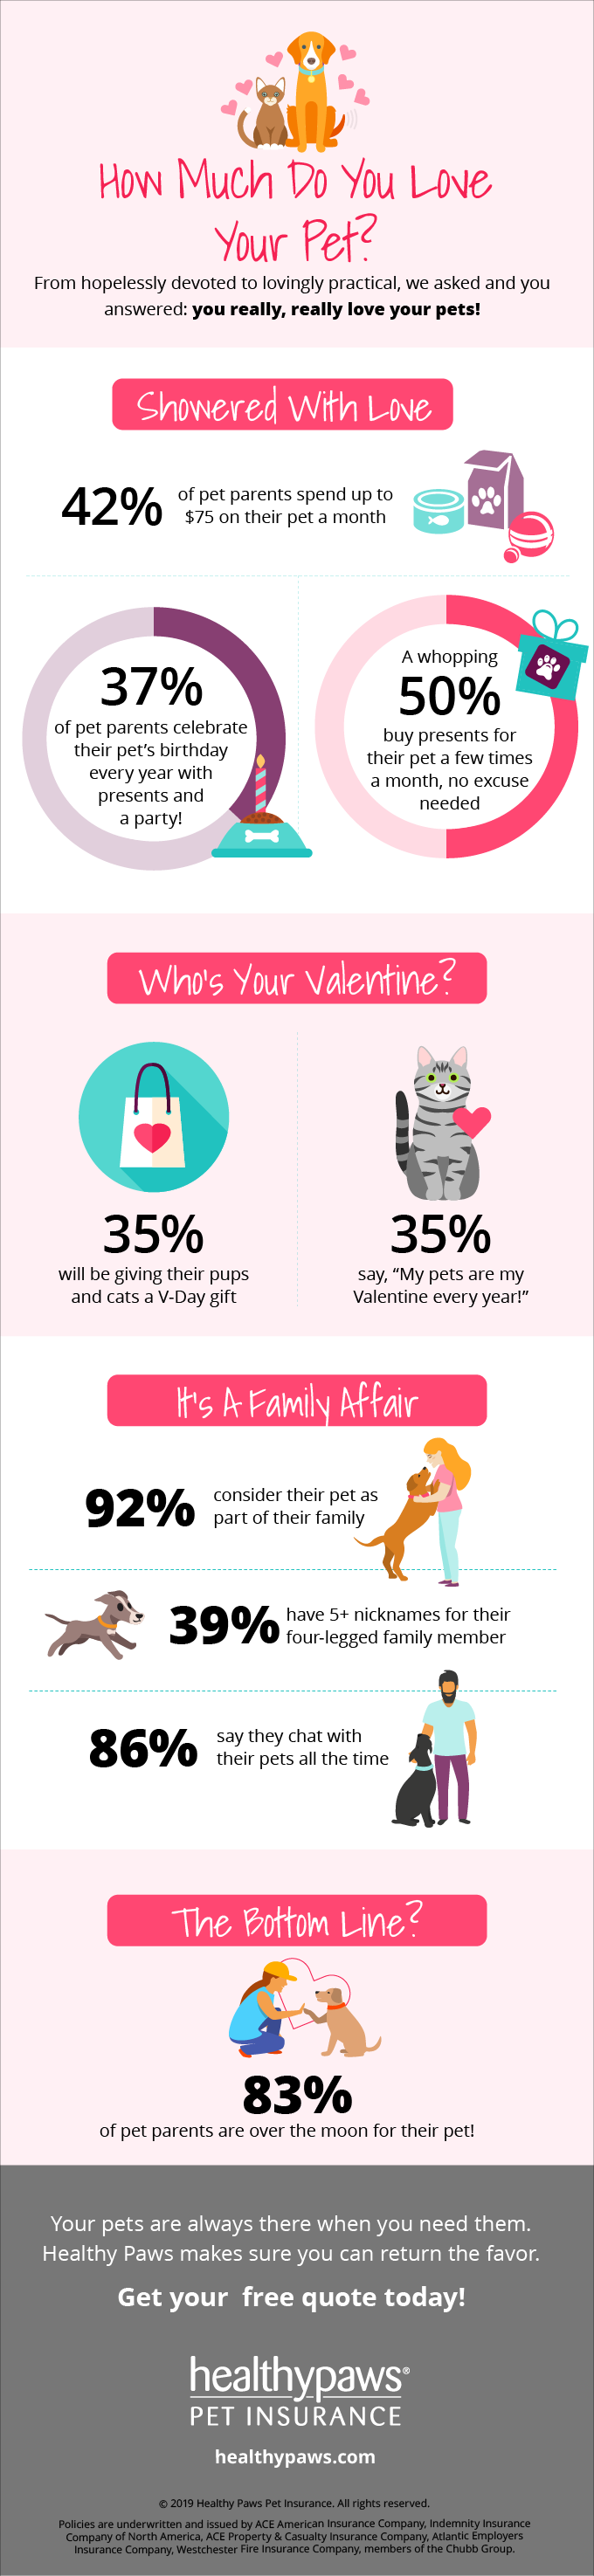 Infographic on how much we love our pets